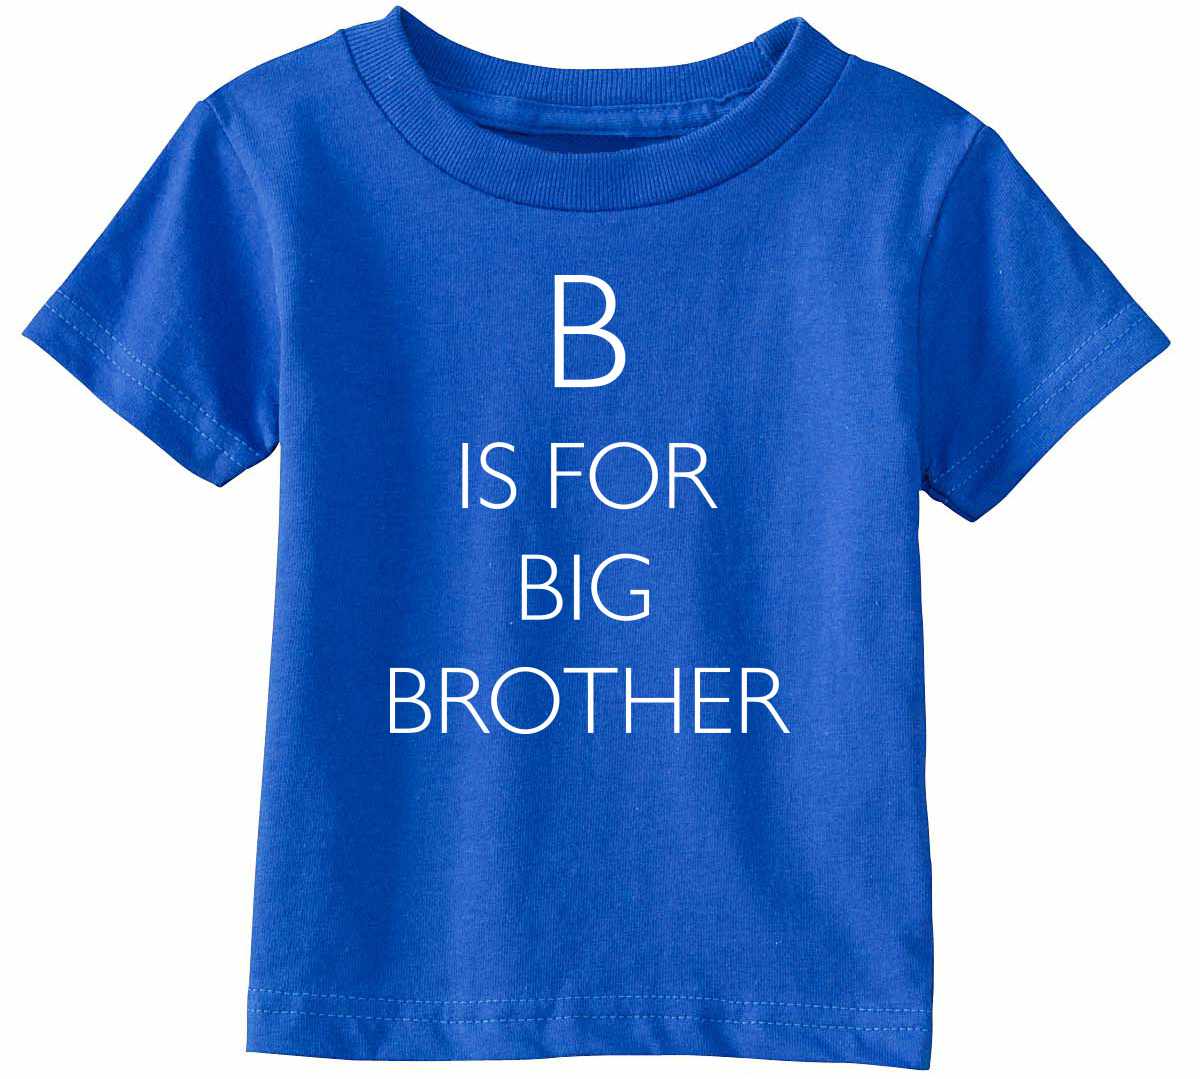 B is for Big Brother Infant/Toddler T-Shirt (#1179-7)